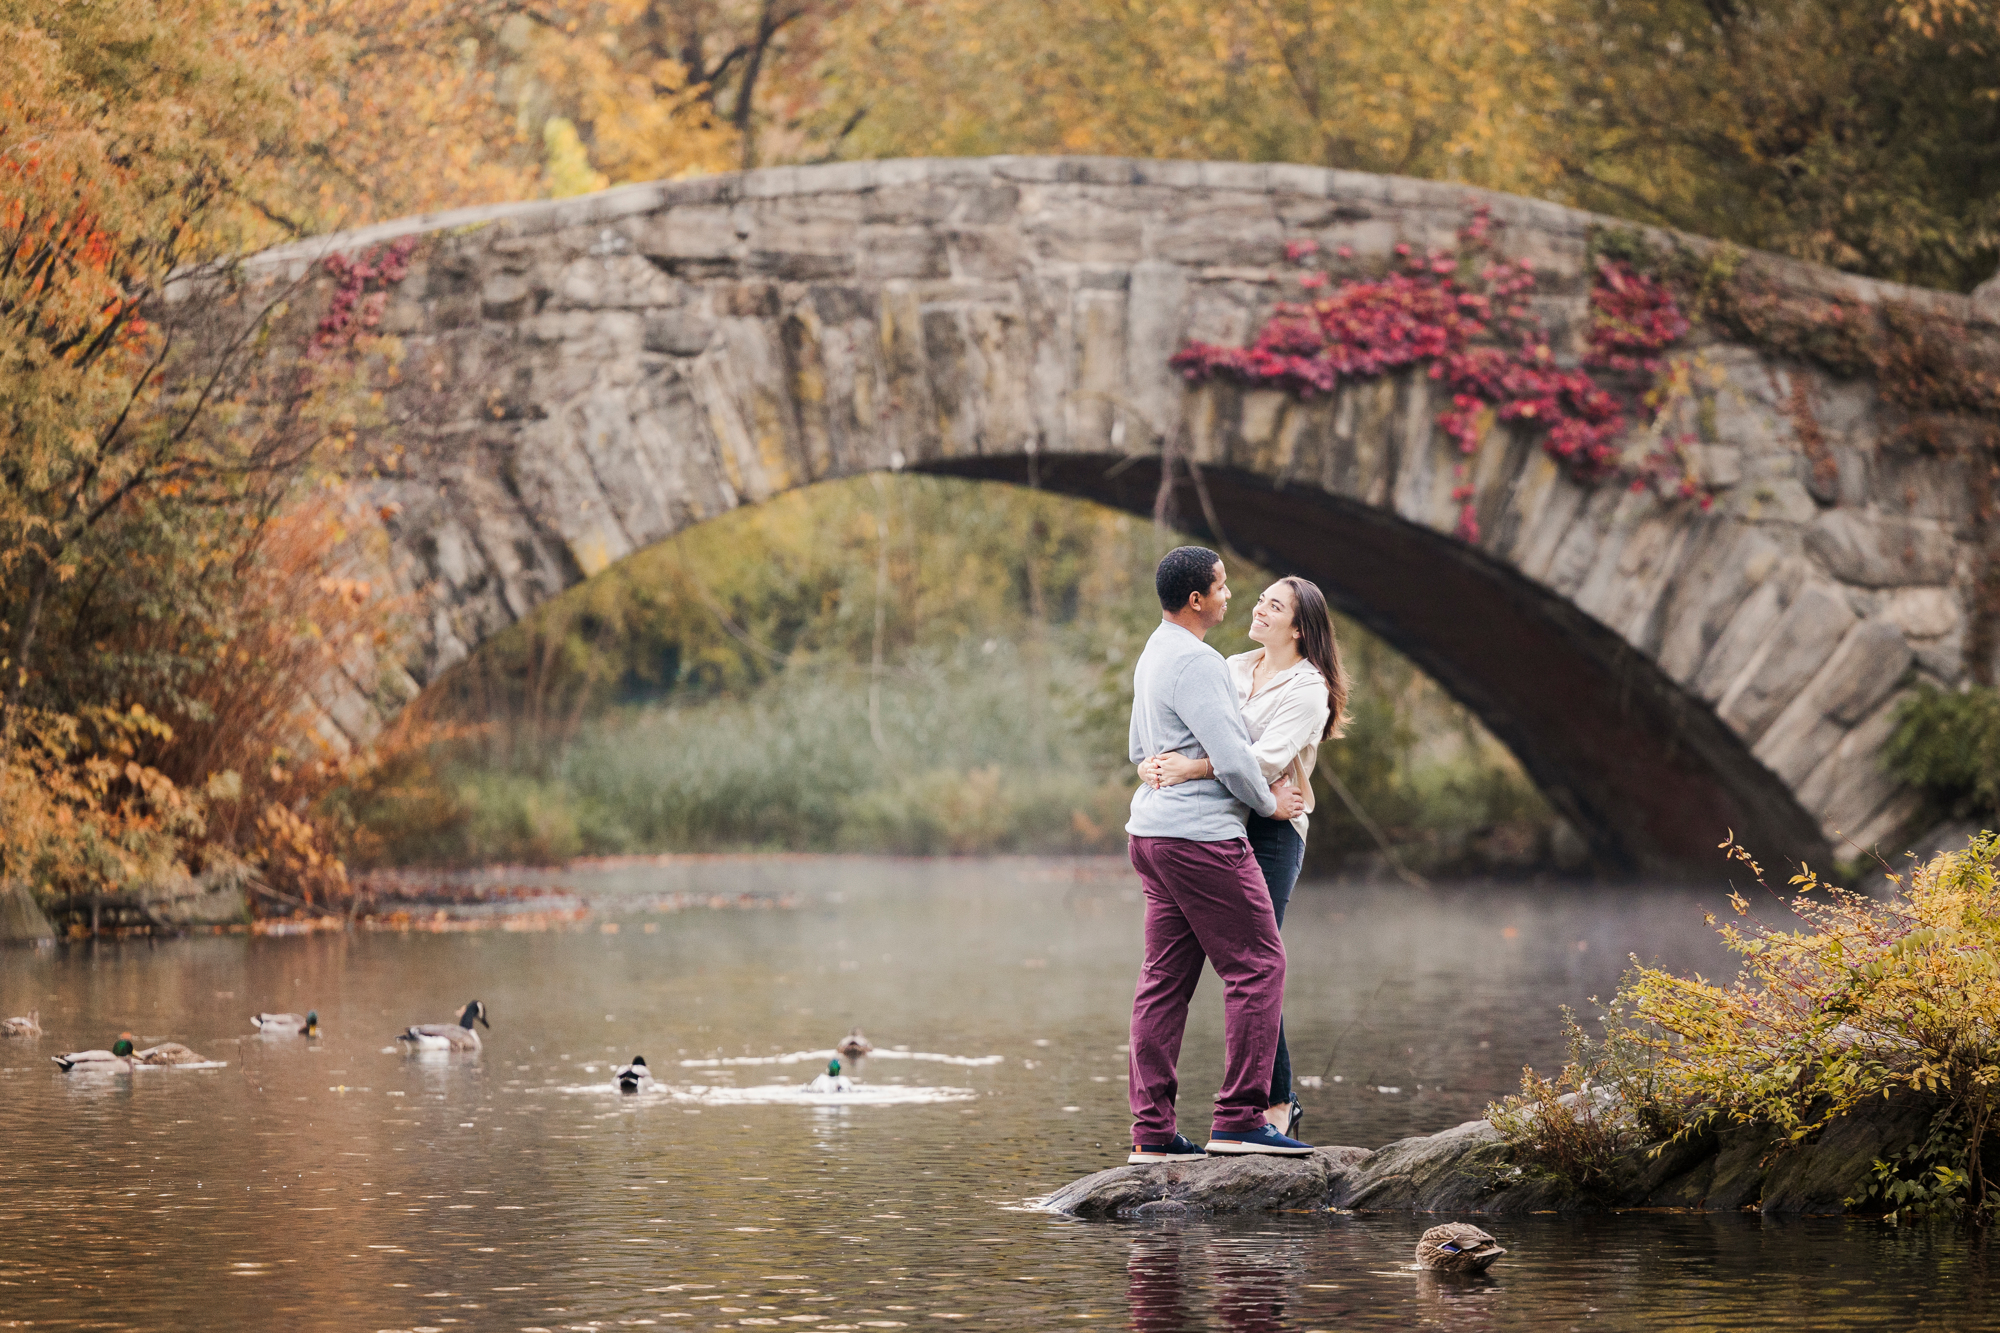 Cheerful Central Park Engagement Shoot